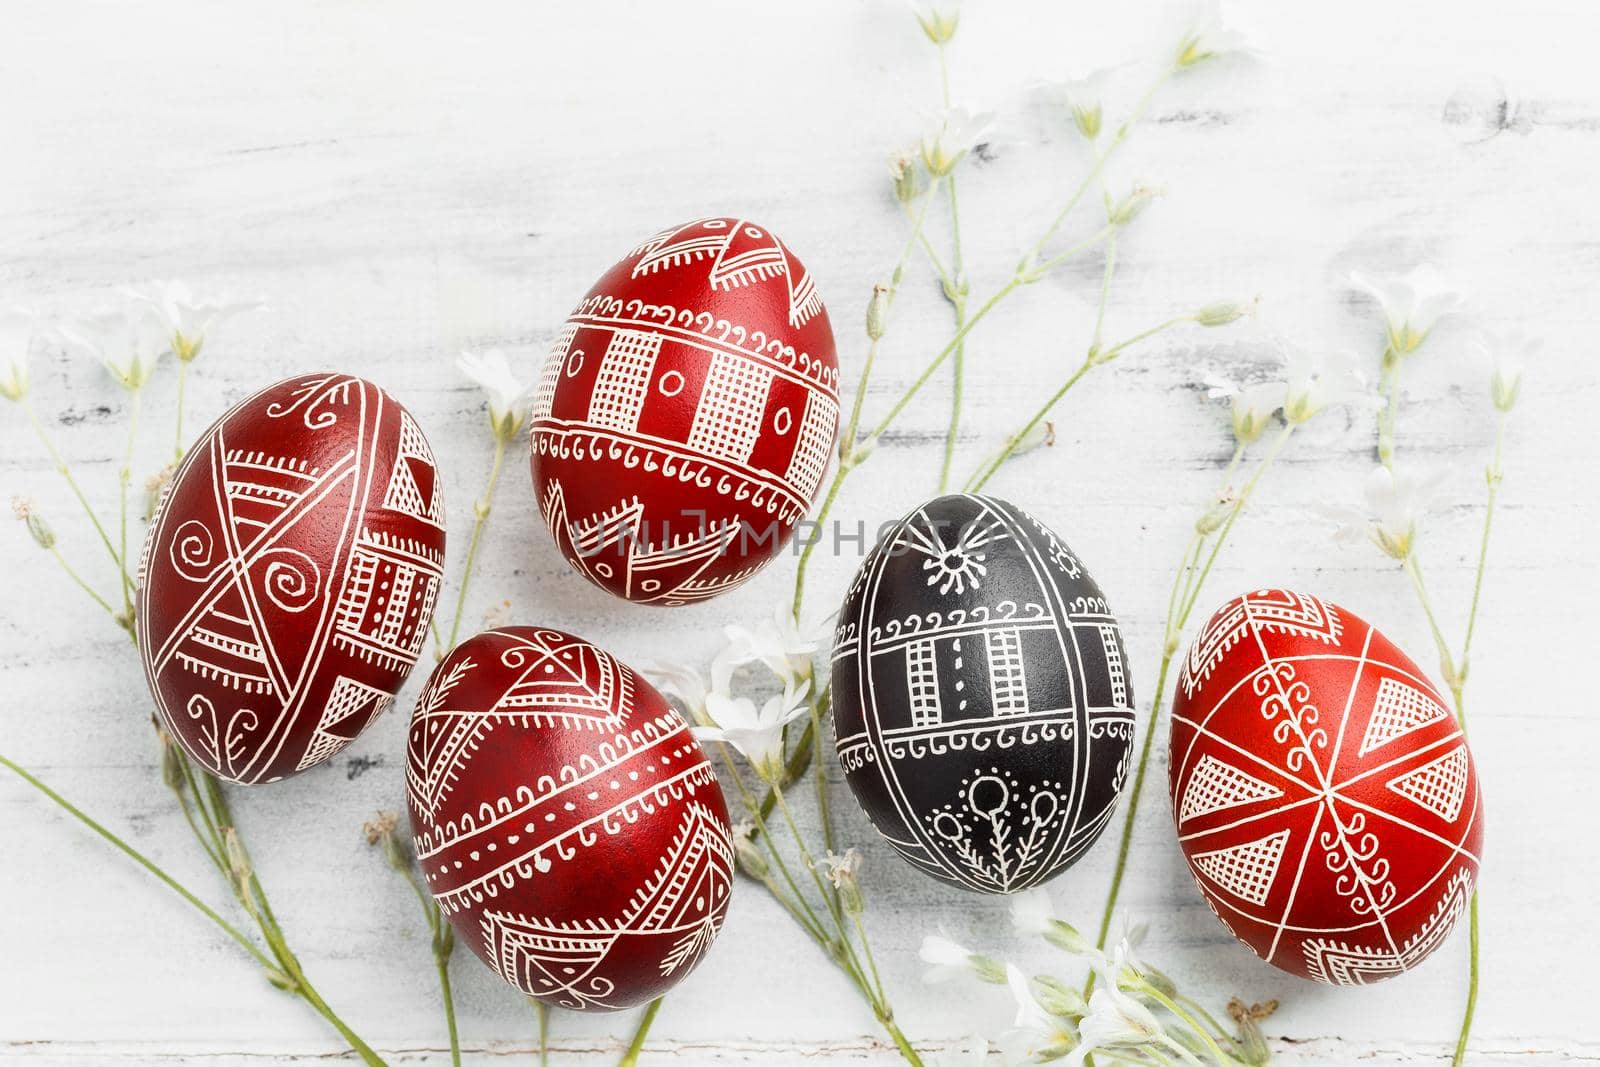 Red and black handmade Easter Pysanka eggs. Ukrainian pysanky decorated with wax-resist dyeing technique. White wooden background